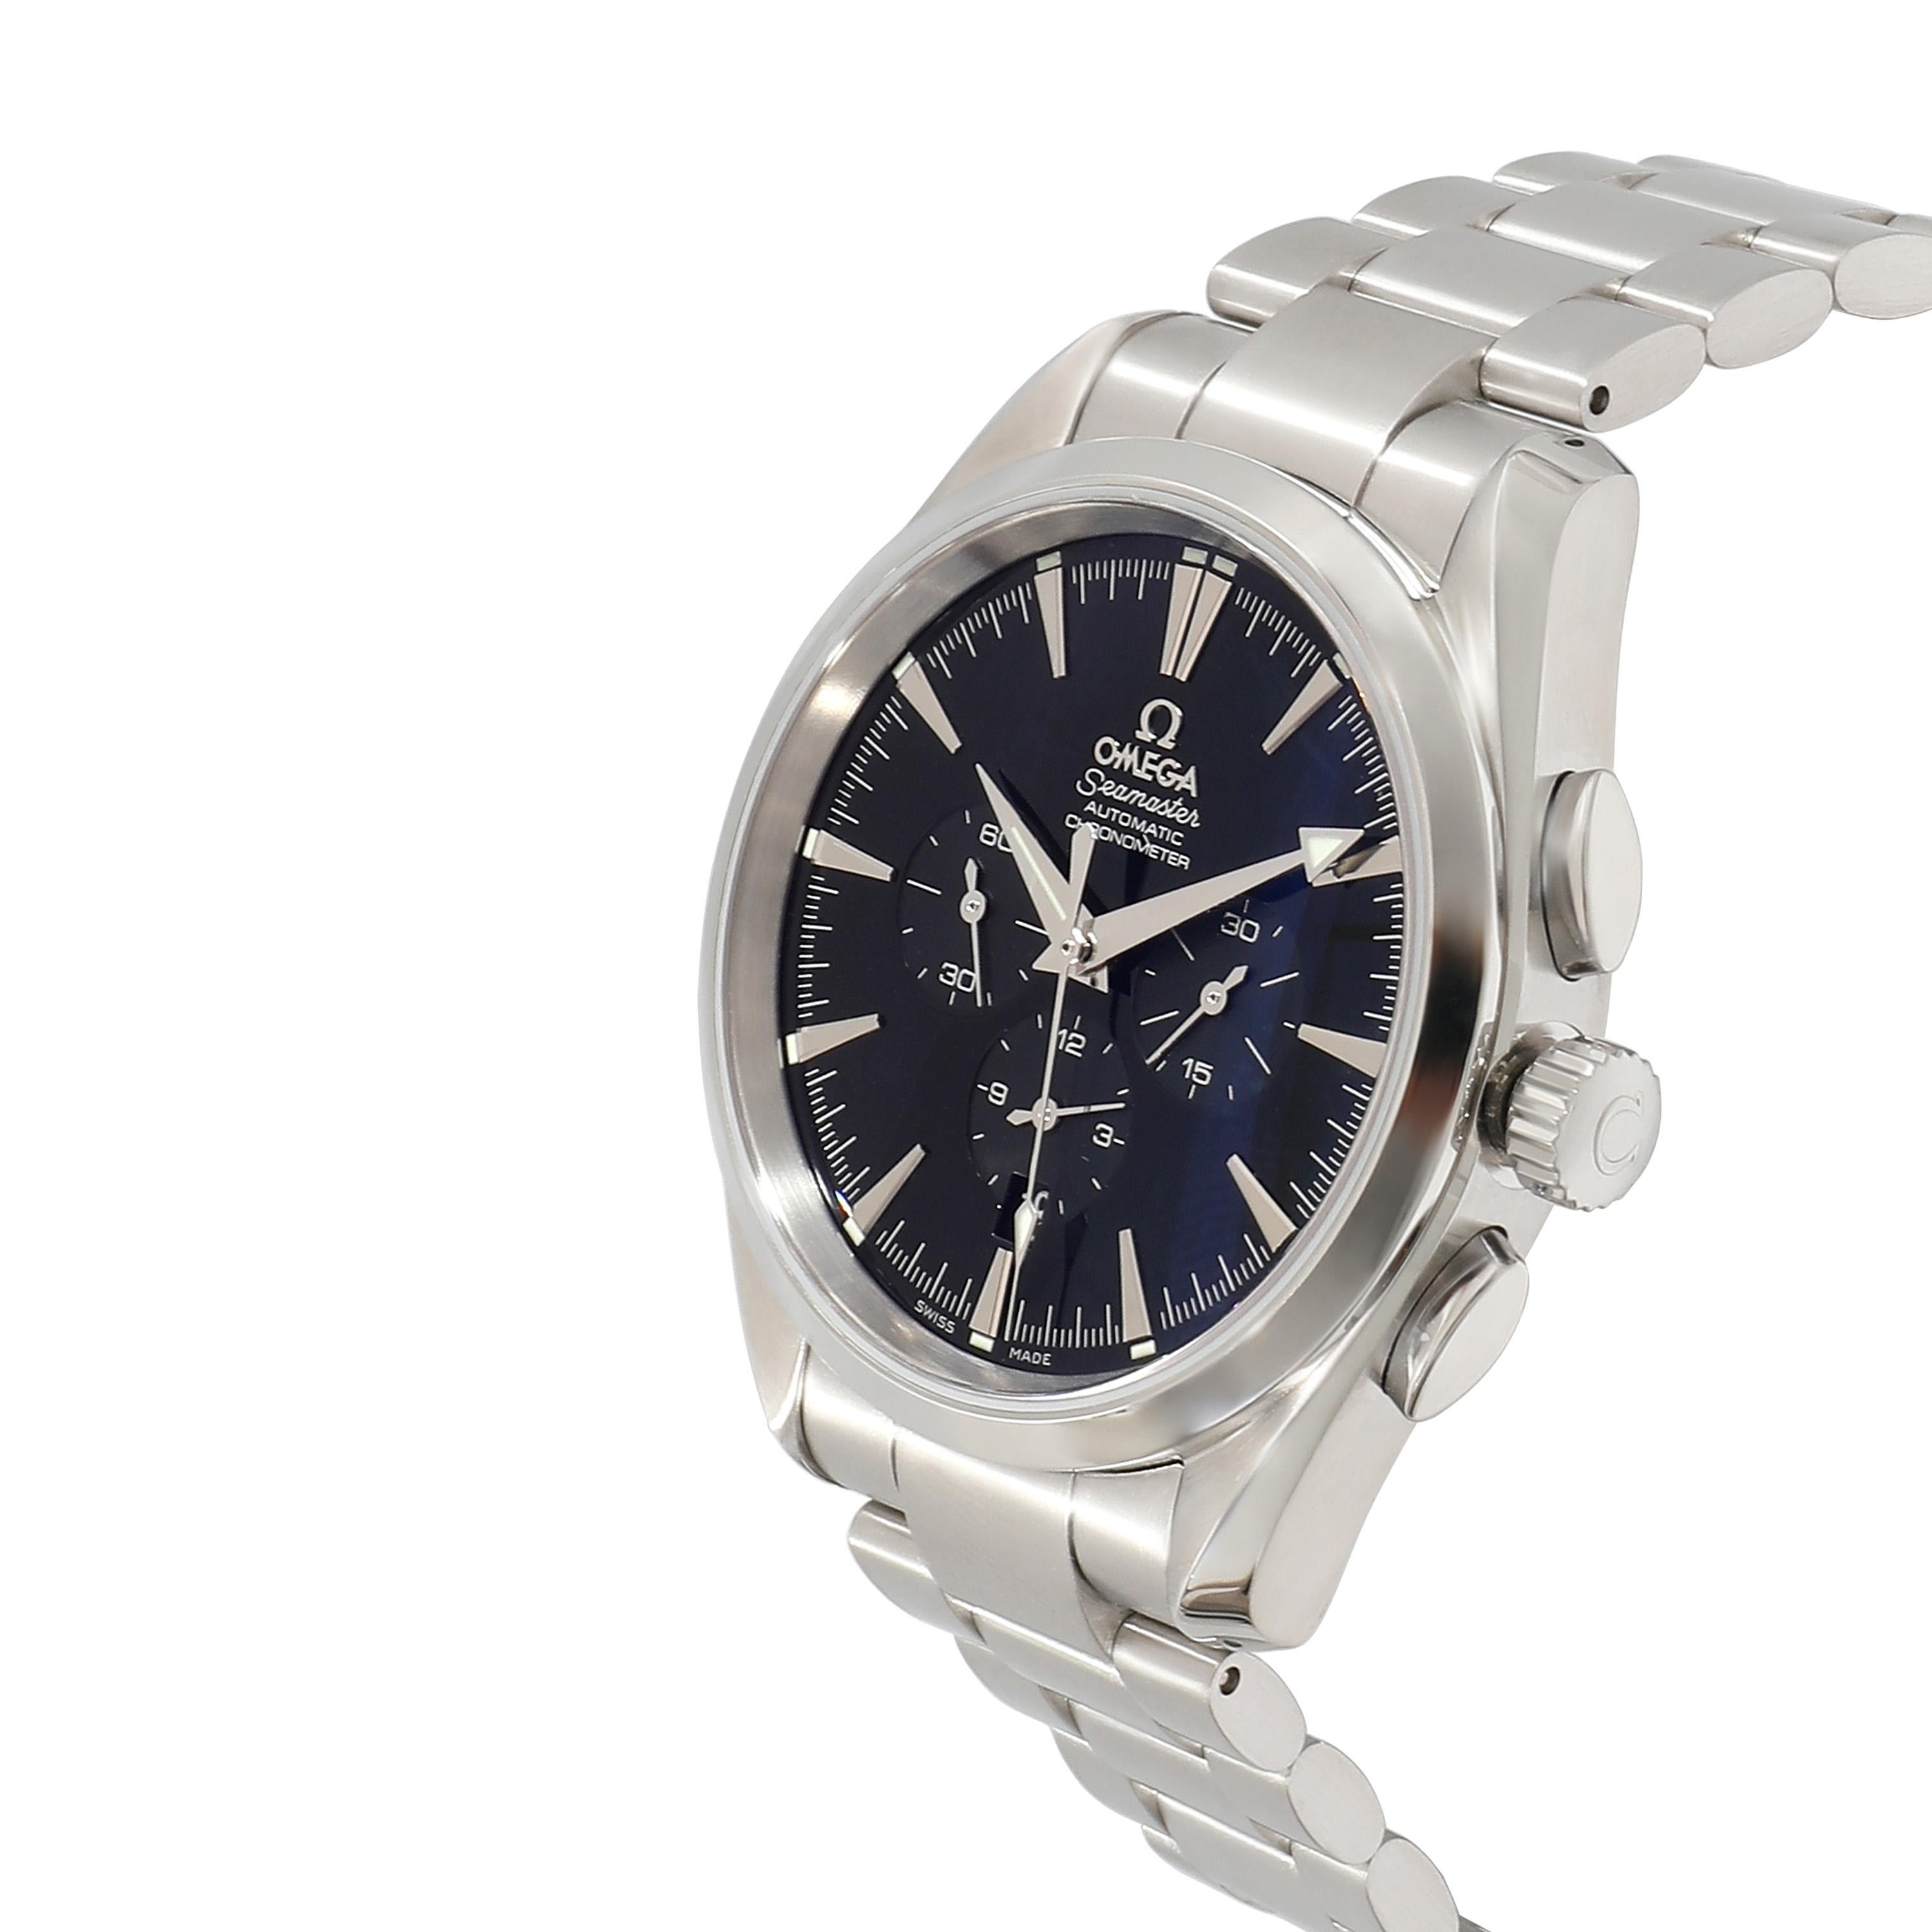 Omega Seamaster Aqua Terra 2512.50.00 Men's Watch in  Stainless Steel

SKU: 133573

PRIMARY DETAILS
Brand: Omega
Model: Seamaster Aqua Terra
Country of Origin: Switzerland
Movement Type: Mechanical: Automatic/Kinetic
Year Manufactured: 2007
Year of